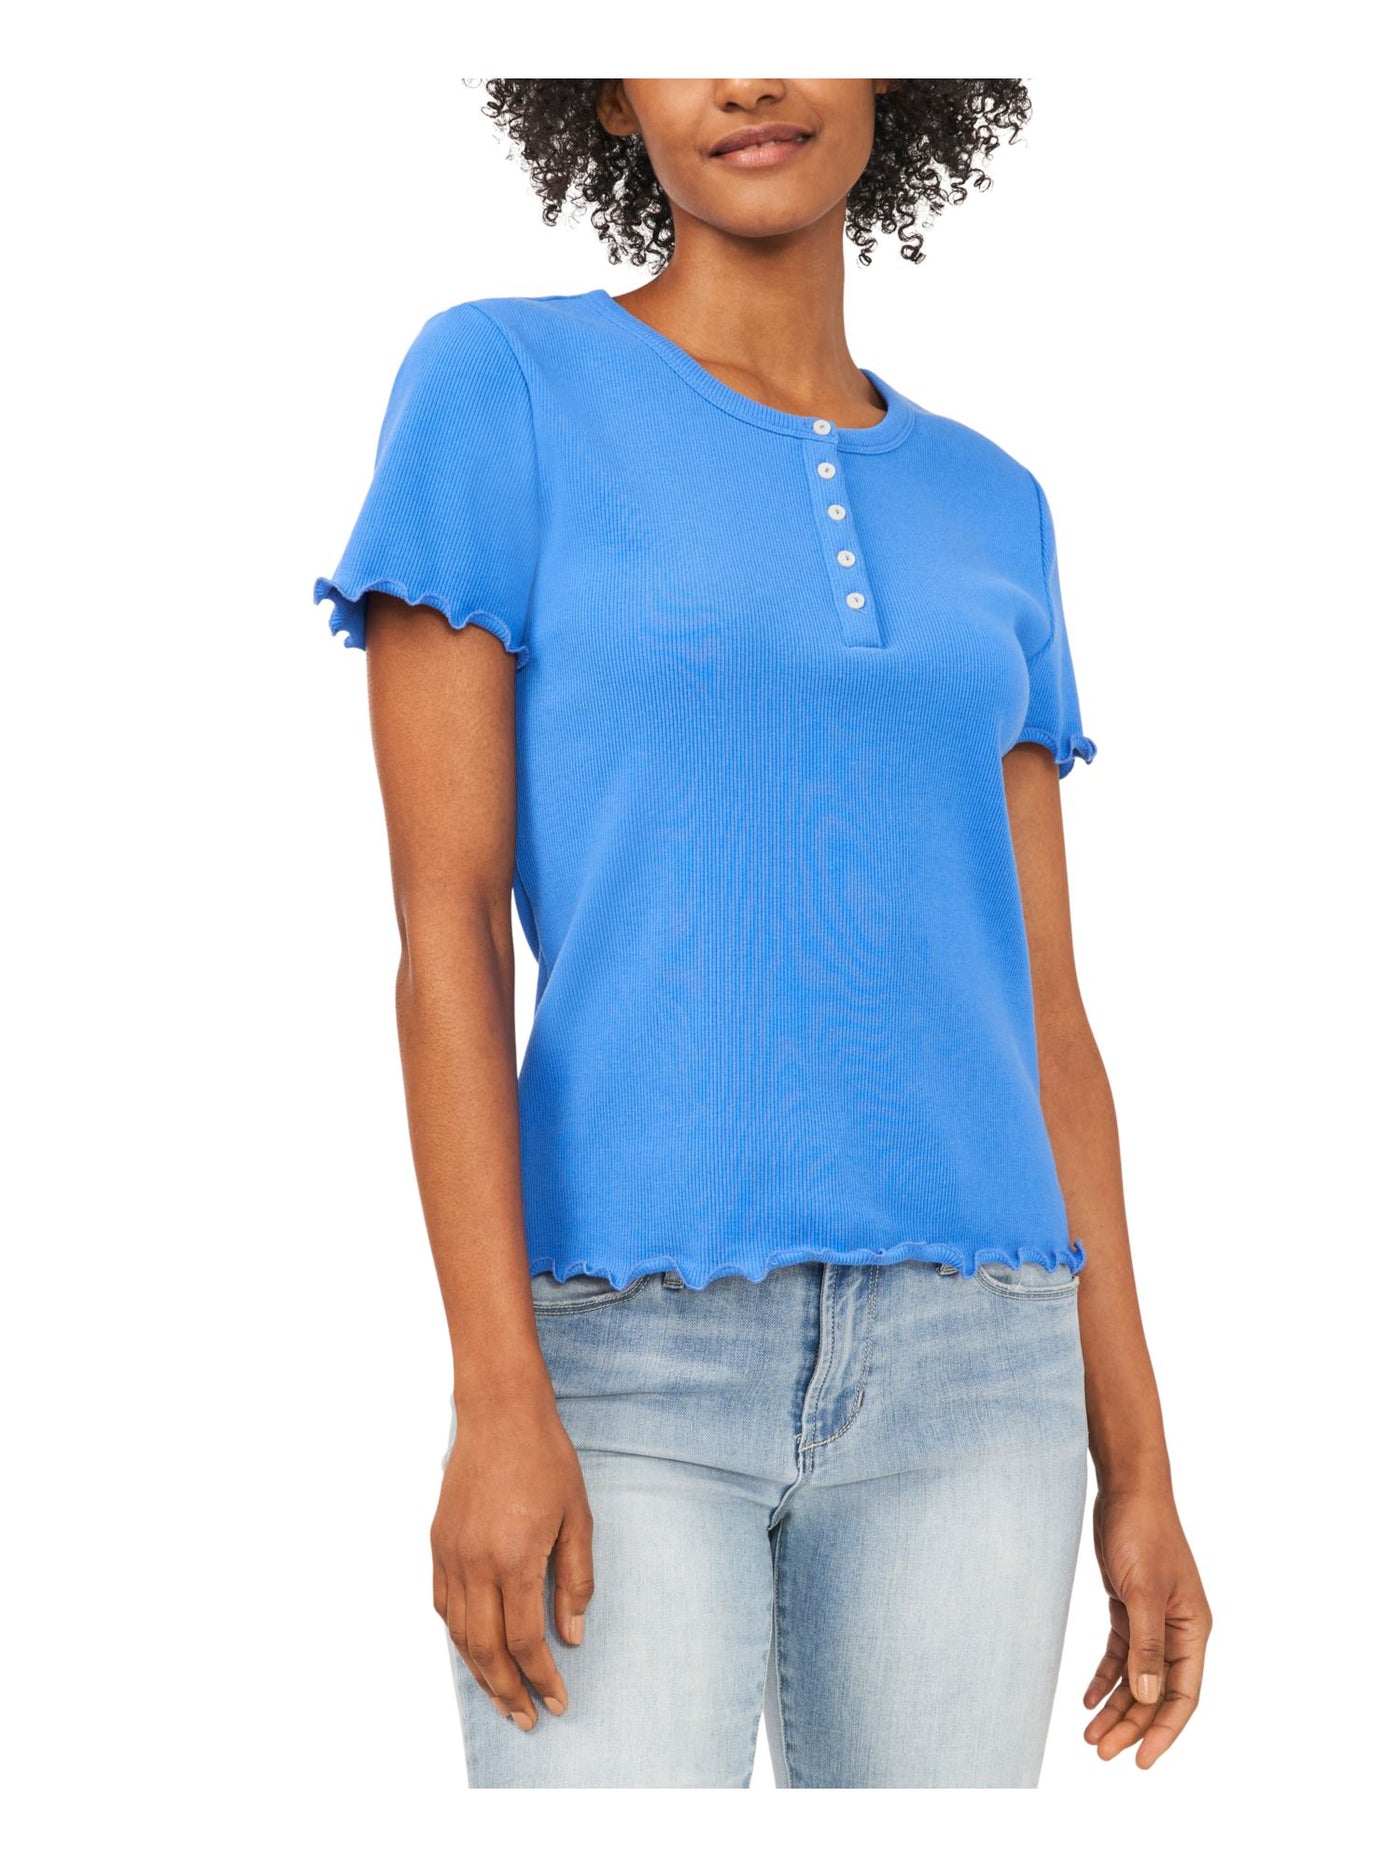 RILEY&RAE Womens Light Blue Stretch Ribbed Buttoned Henley Short Sleeve Crew Neck Top L